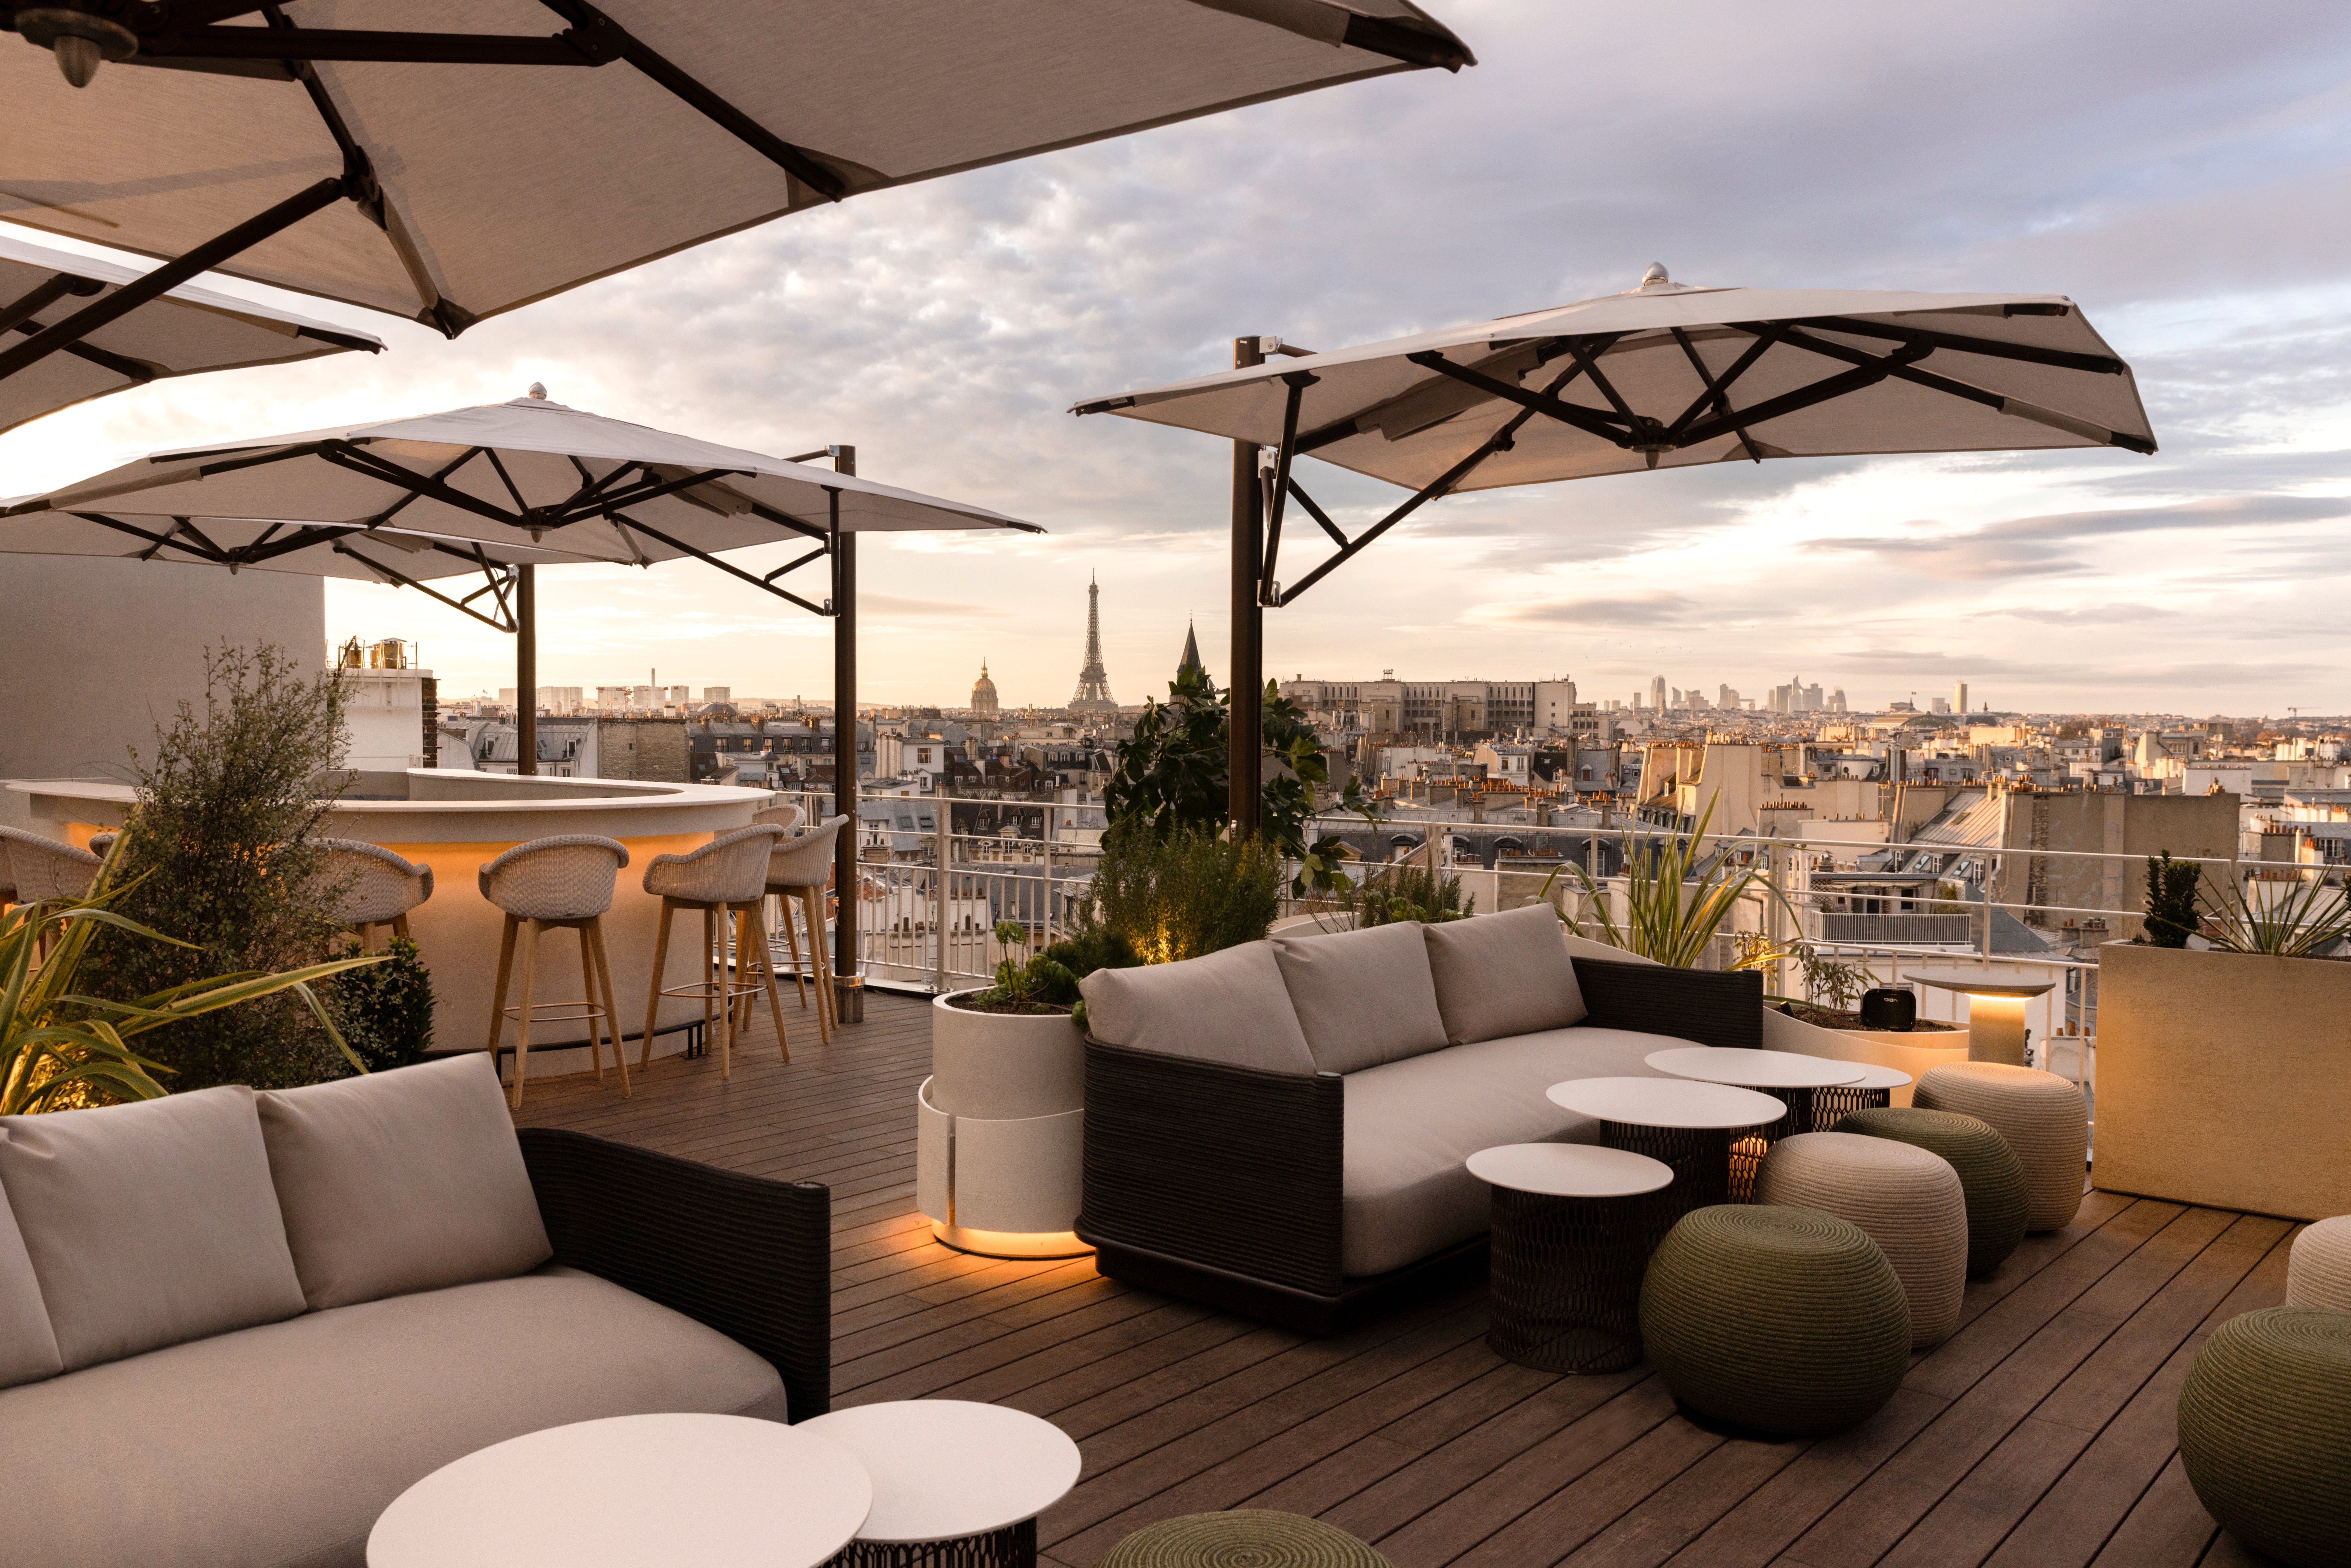 Summer evenings spent on the rooftop of the Dame des Arts will provide great drinks and even better views